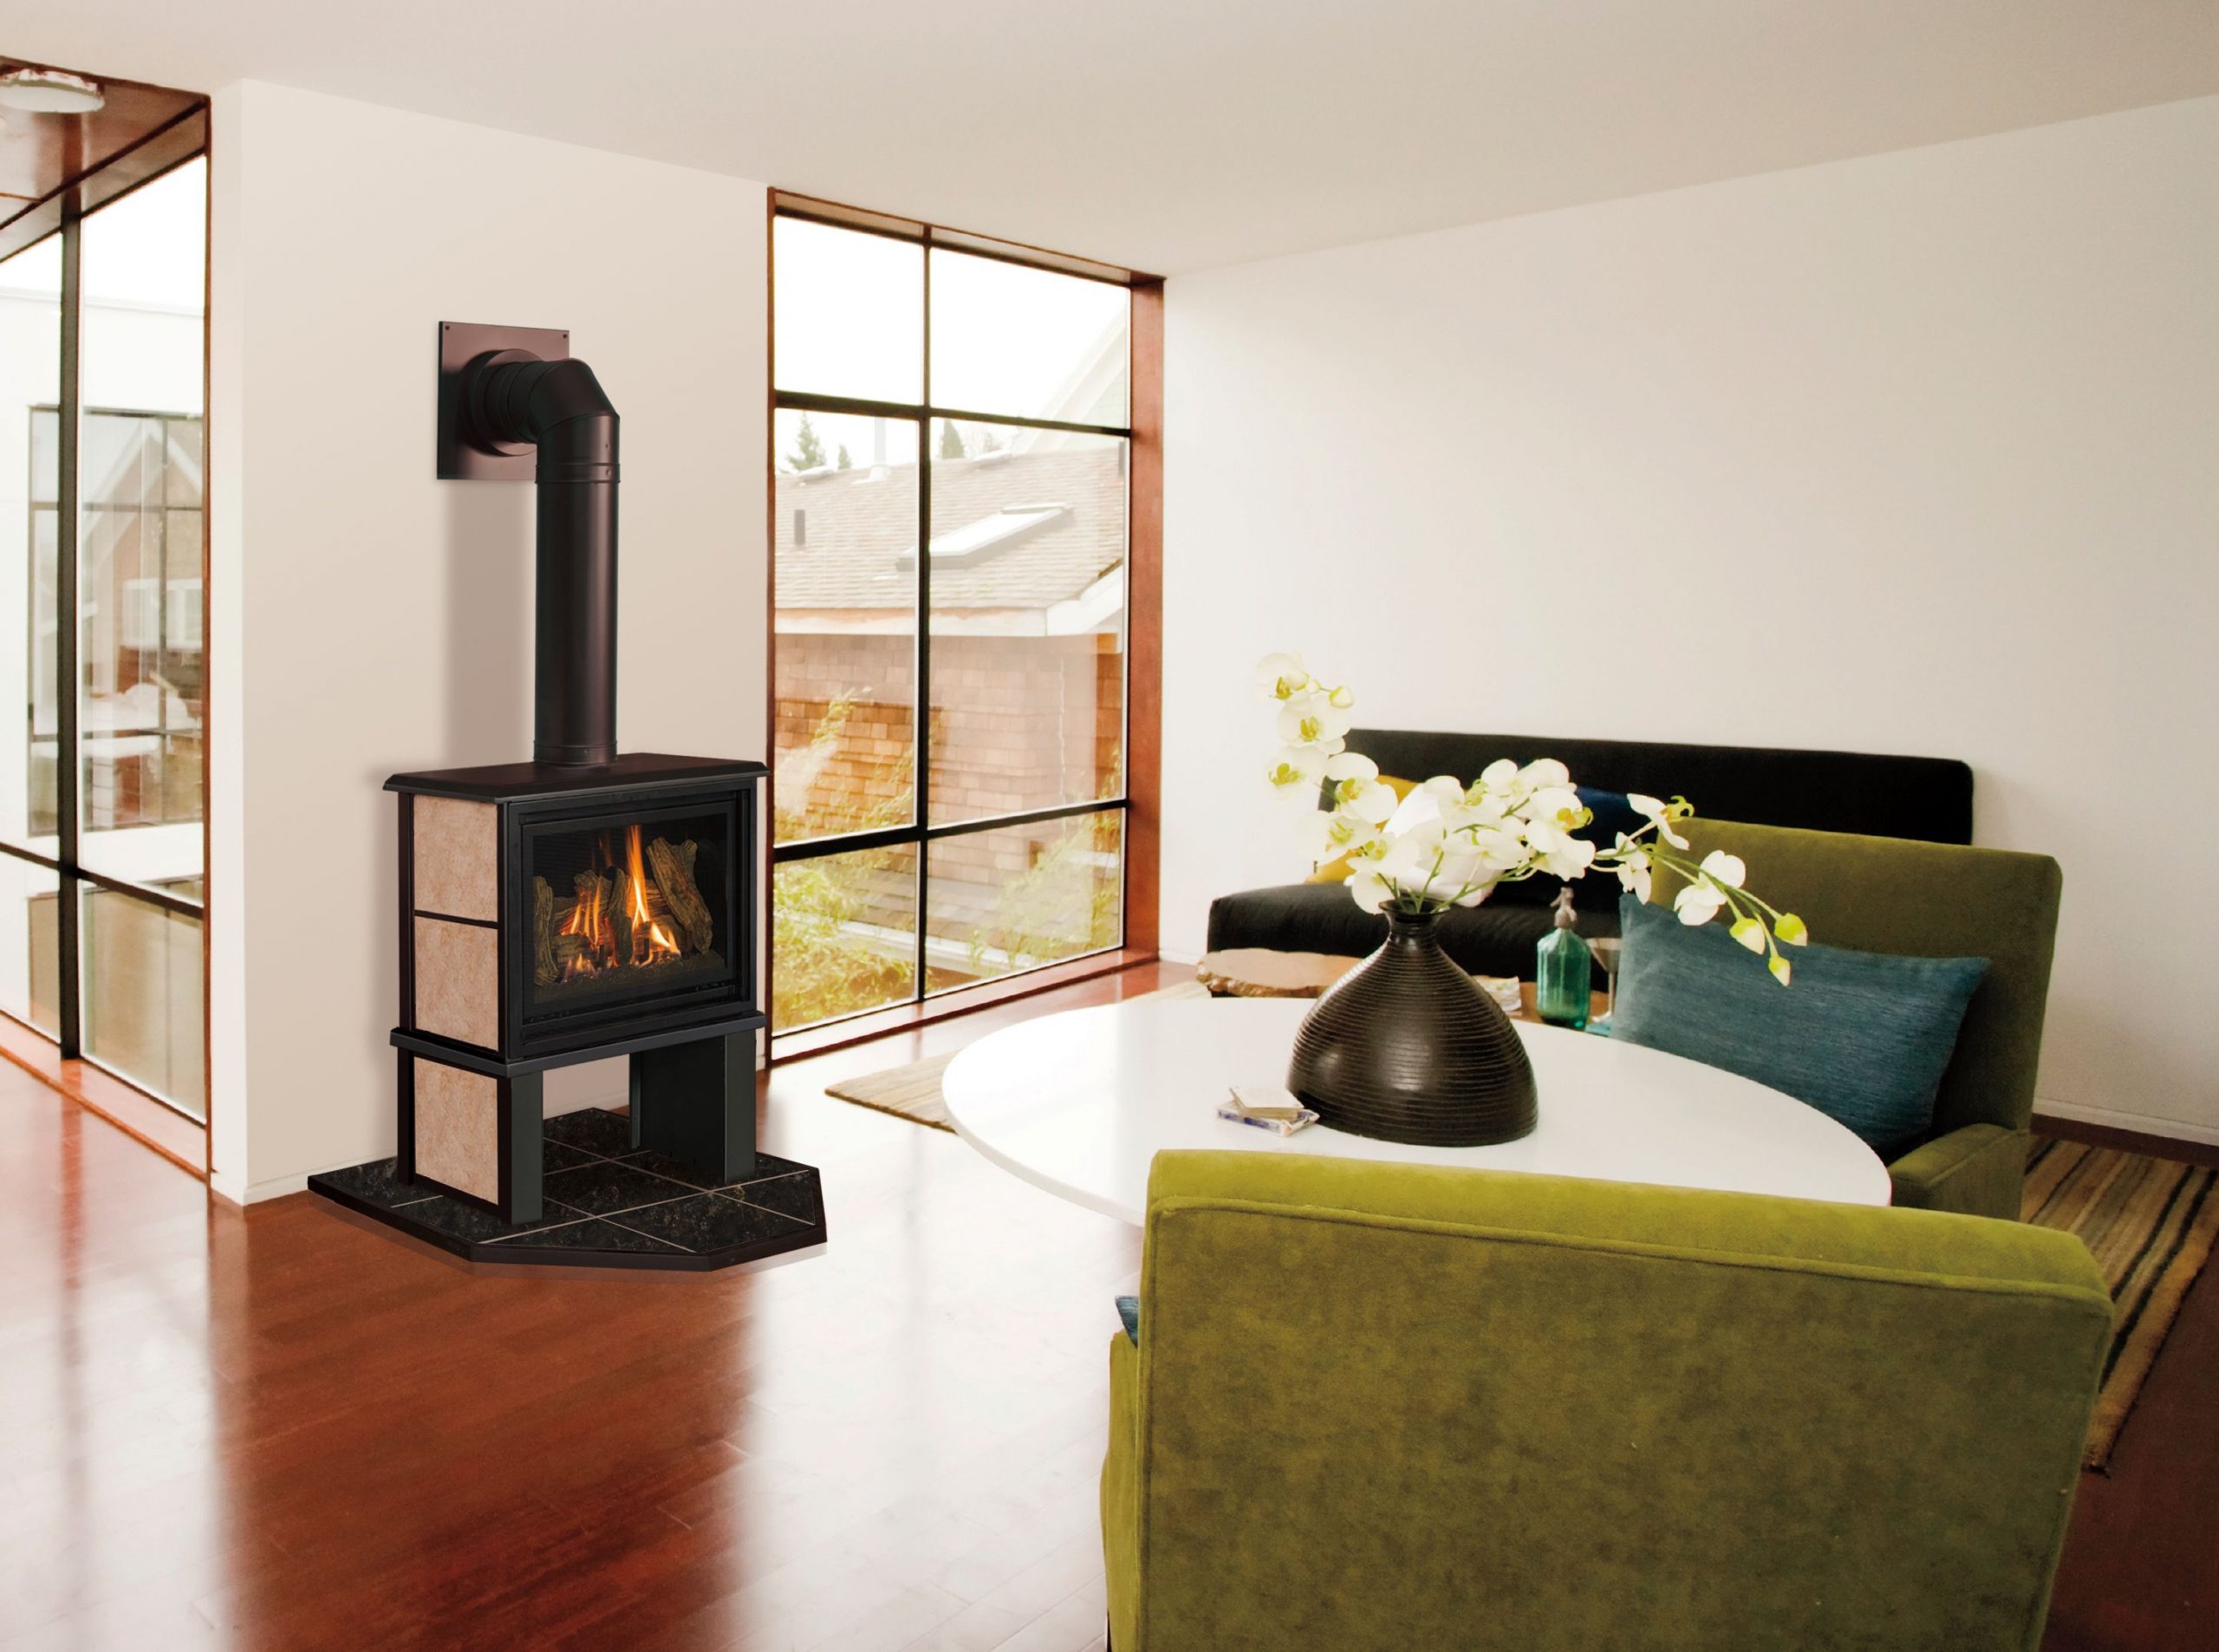 Pros and Cons to a Wood Stove